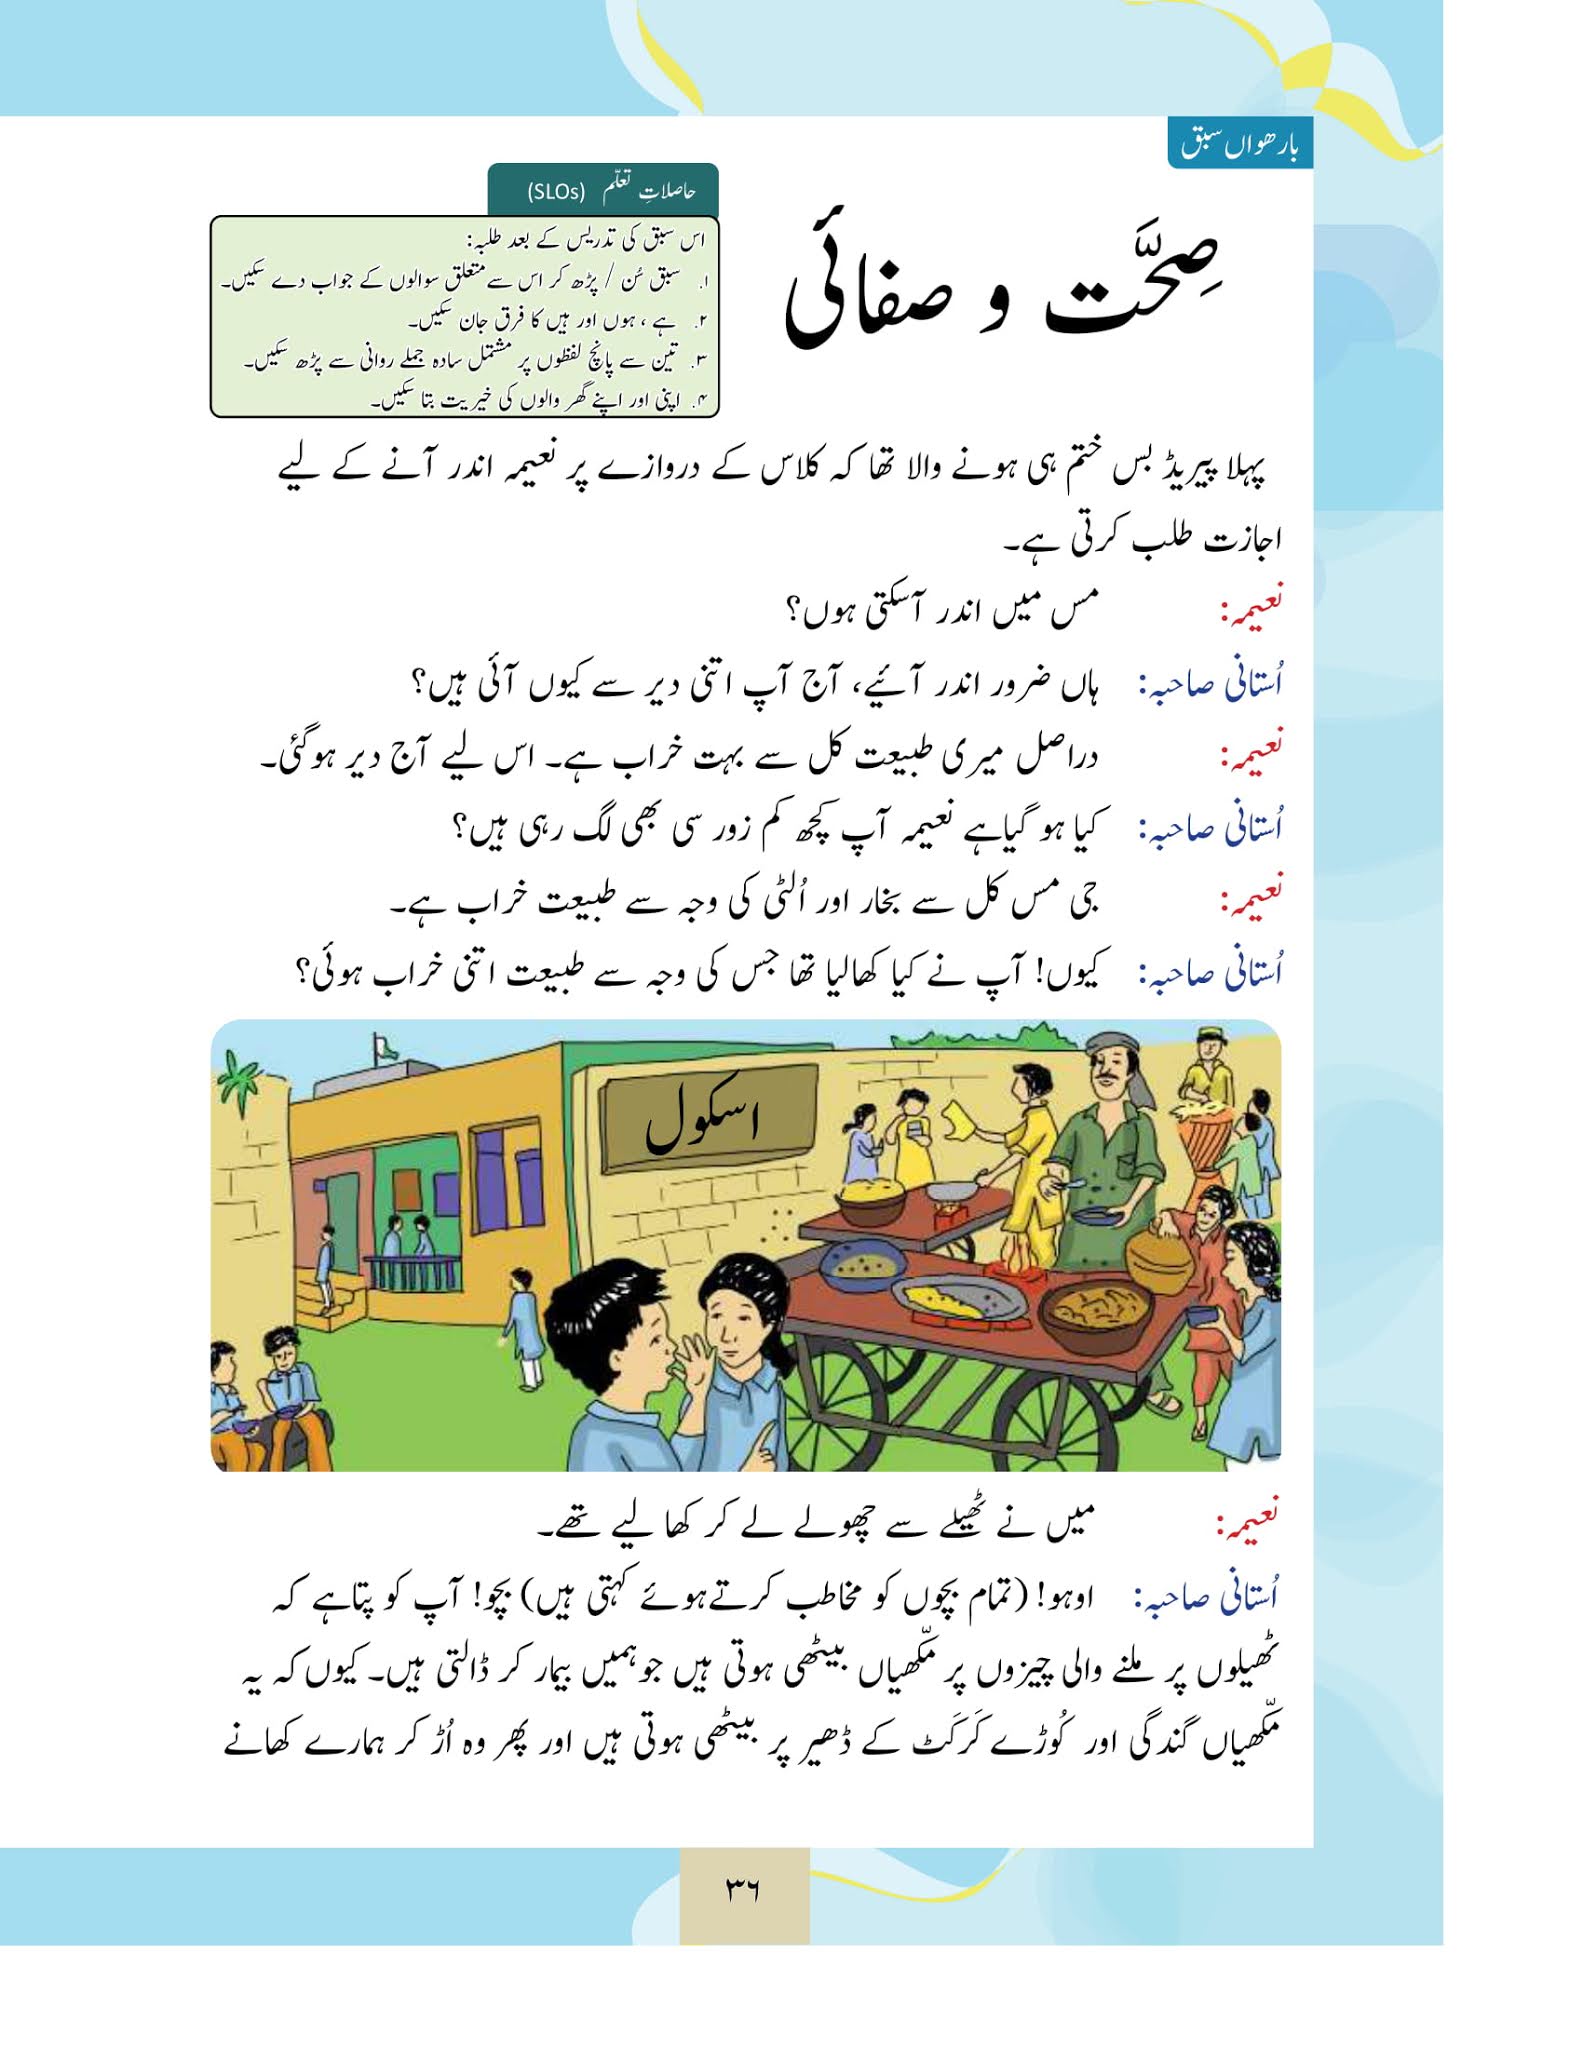 book review of any book in urdu